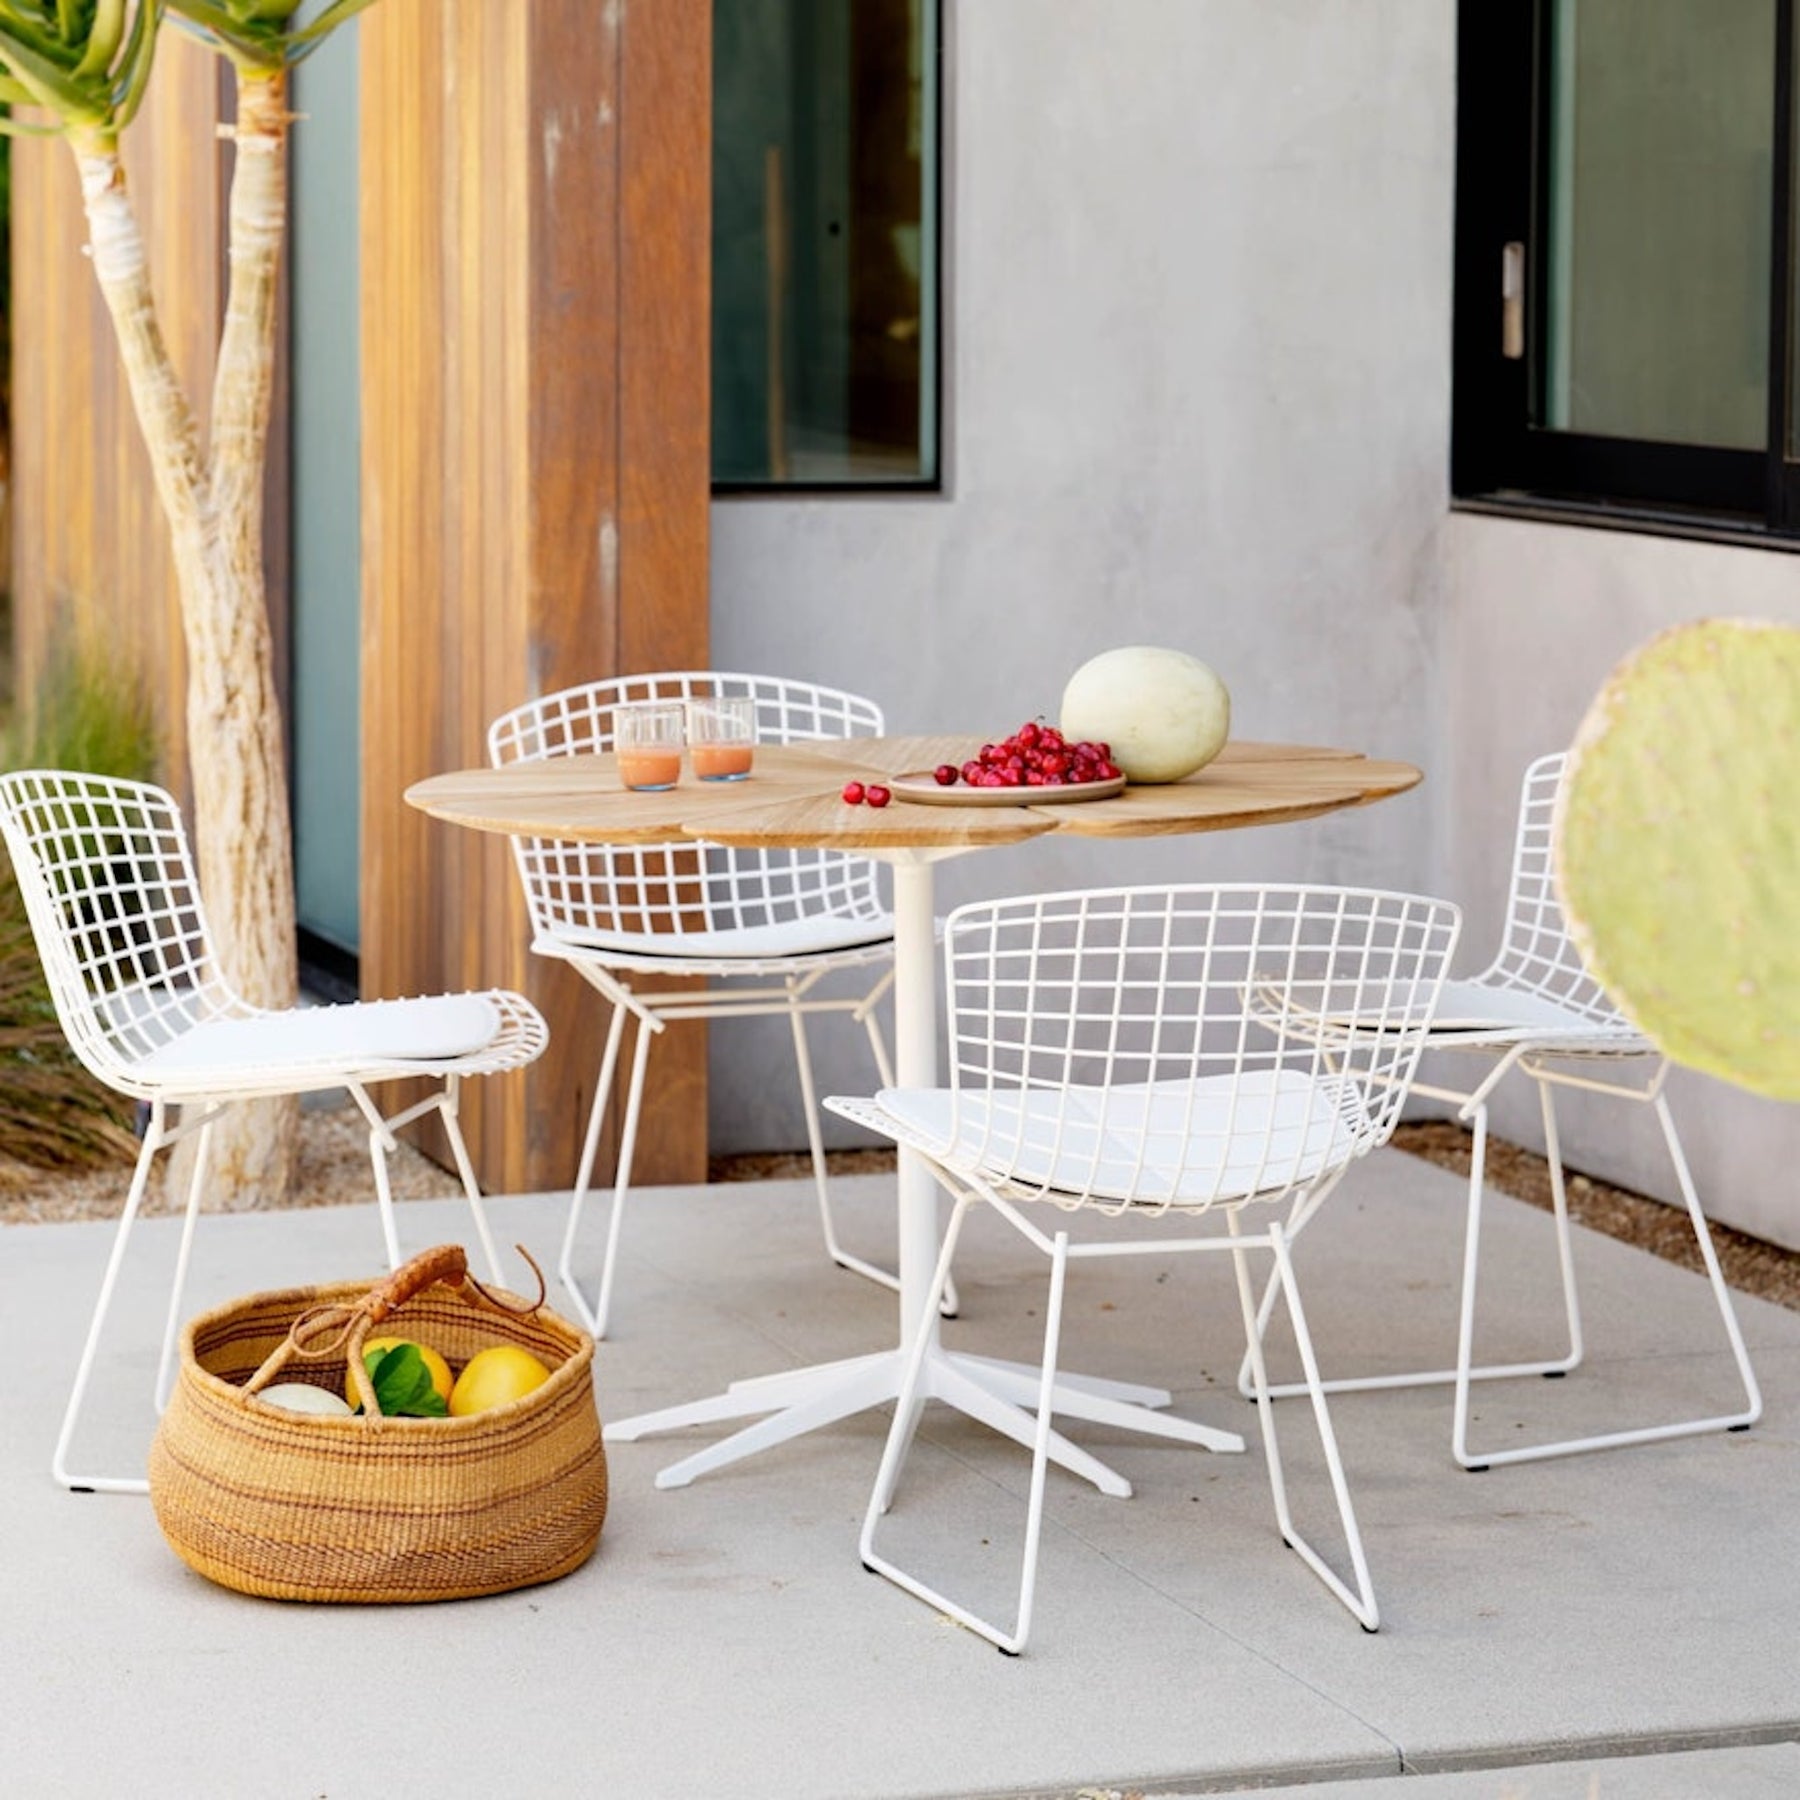 Knoll Richard Schultz Petal Dining Table with Bertoia Dining Chairs Outdoors